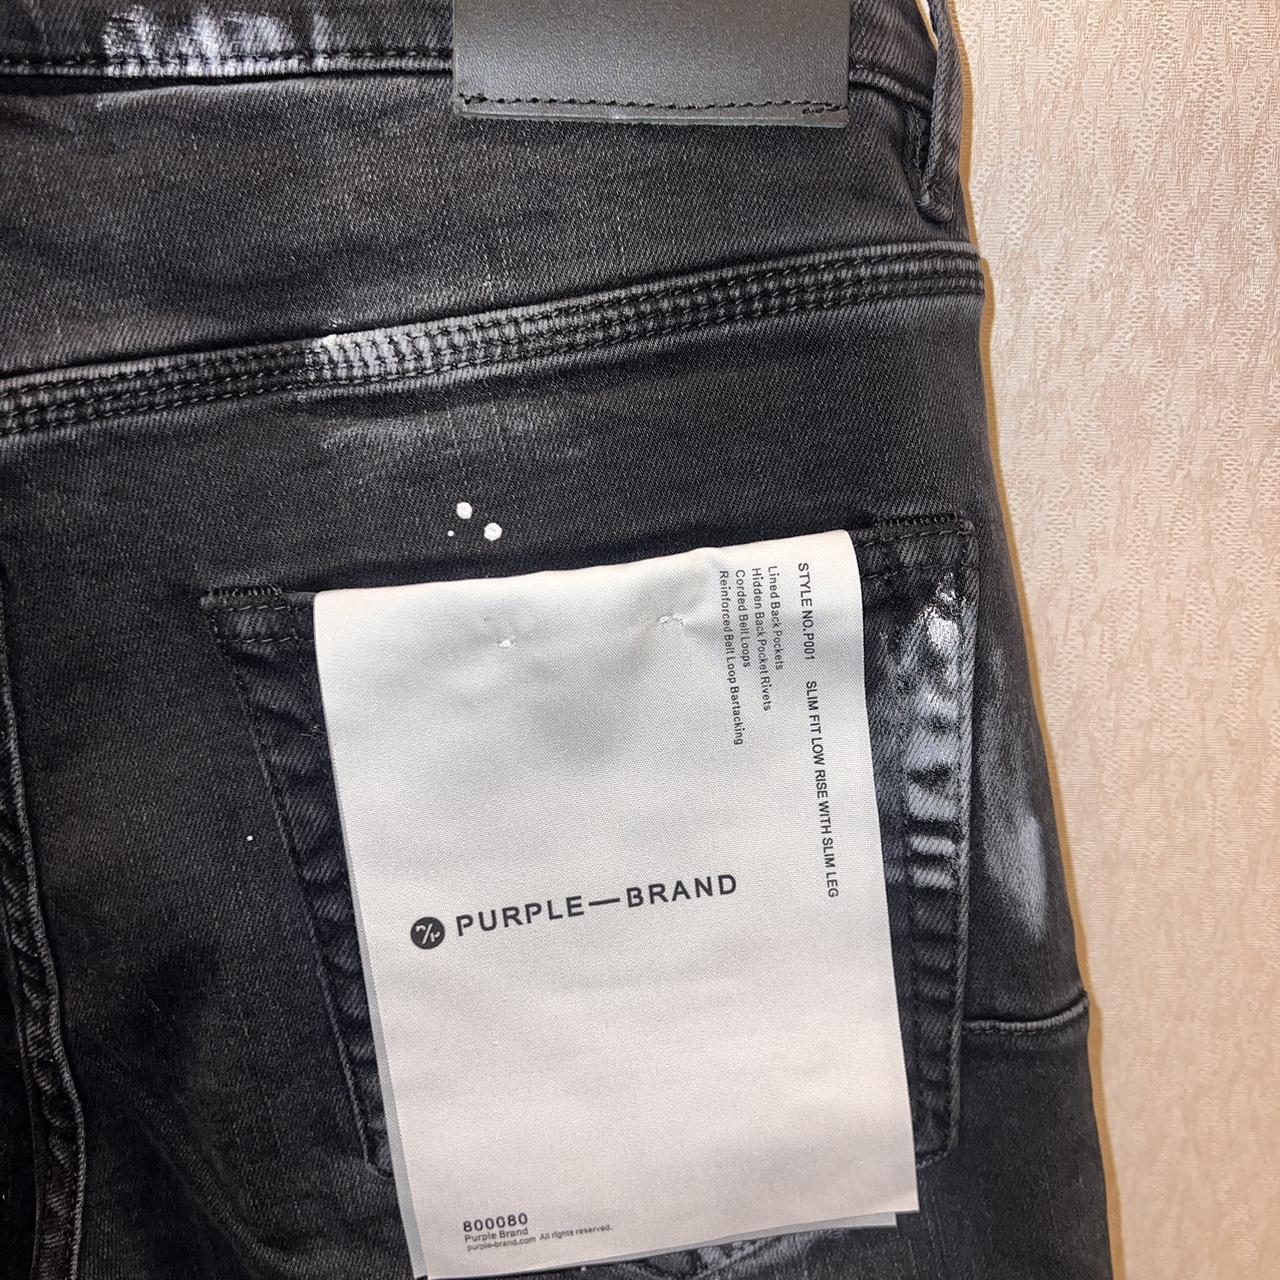 Brand new purple jeans comes with all the tags even - Depop